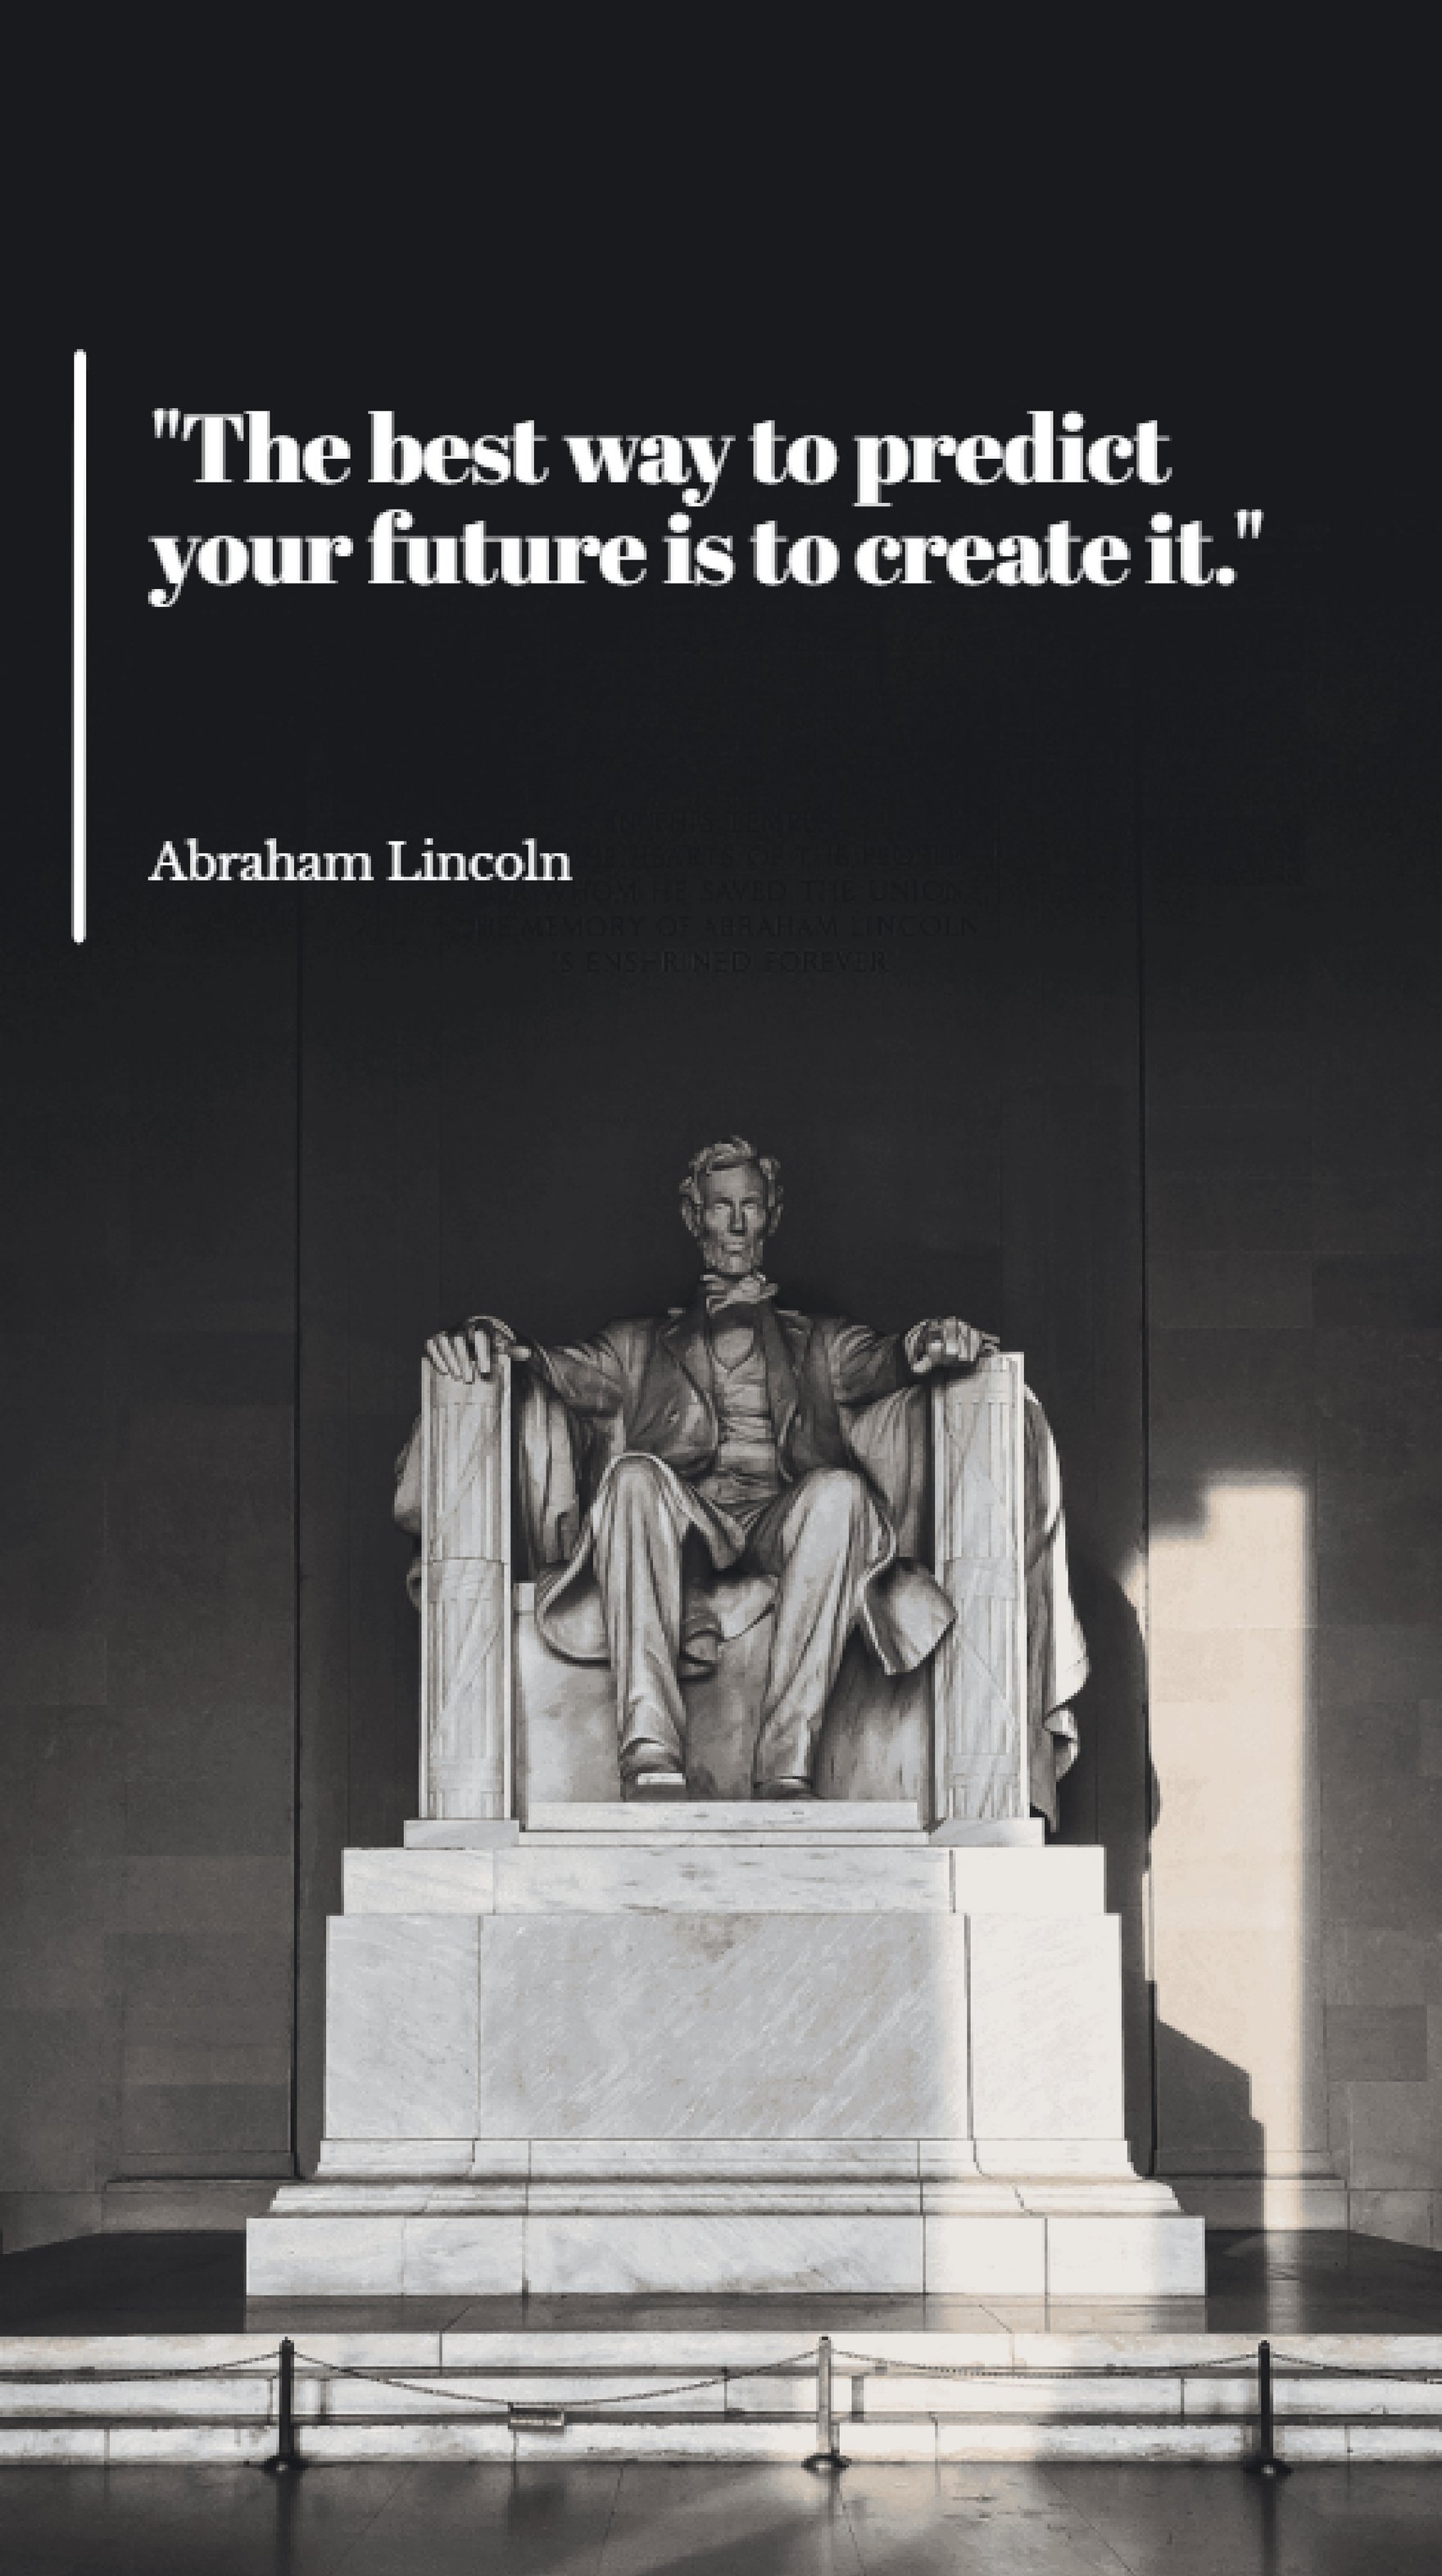 Abraham Lincoln - The best way to predict your future is to create it